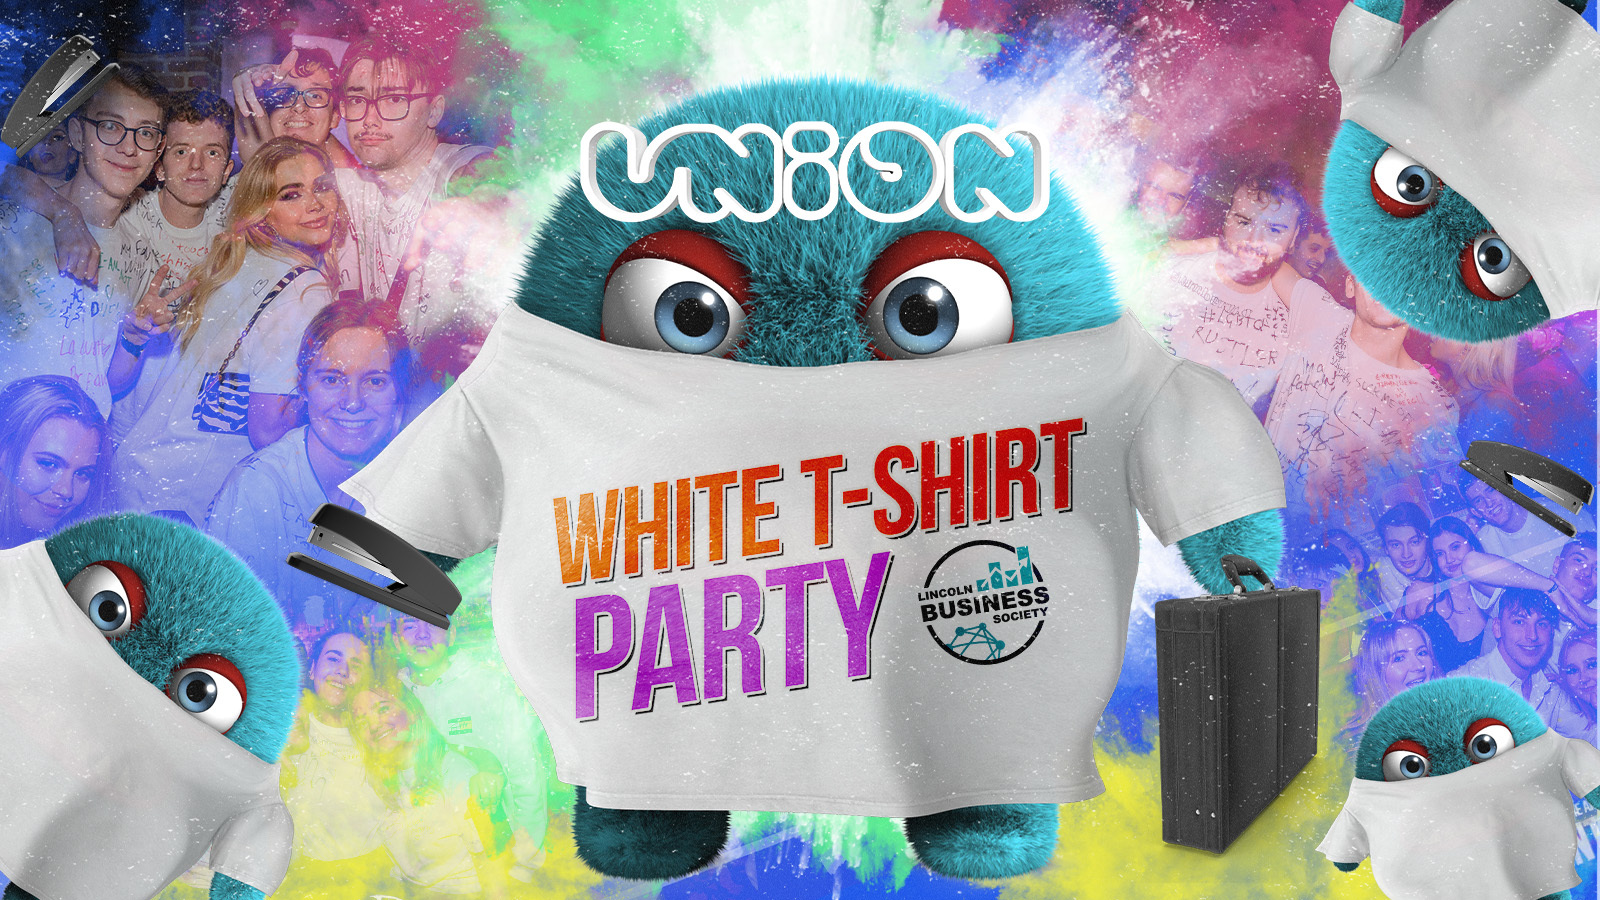 UNION TUESDAY’S PRESENTS THE WHITE T-SHIRT PARTY HOSTED BY UOL BUSINESS